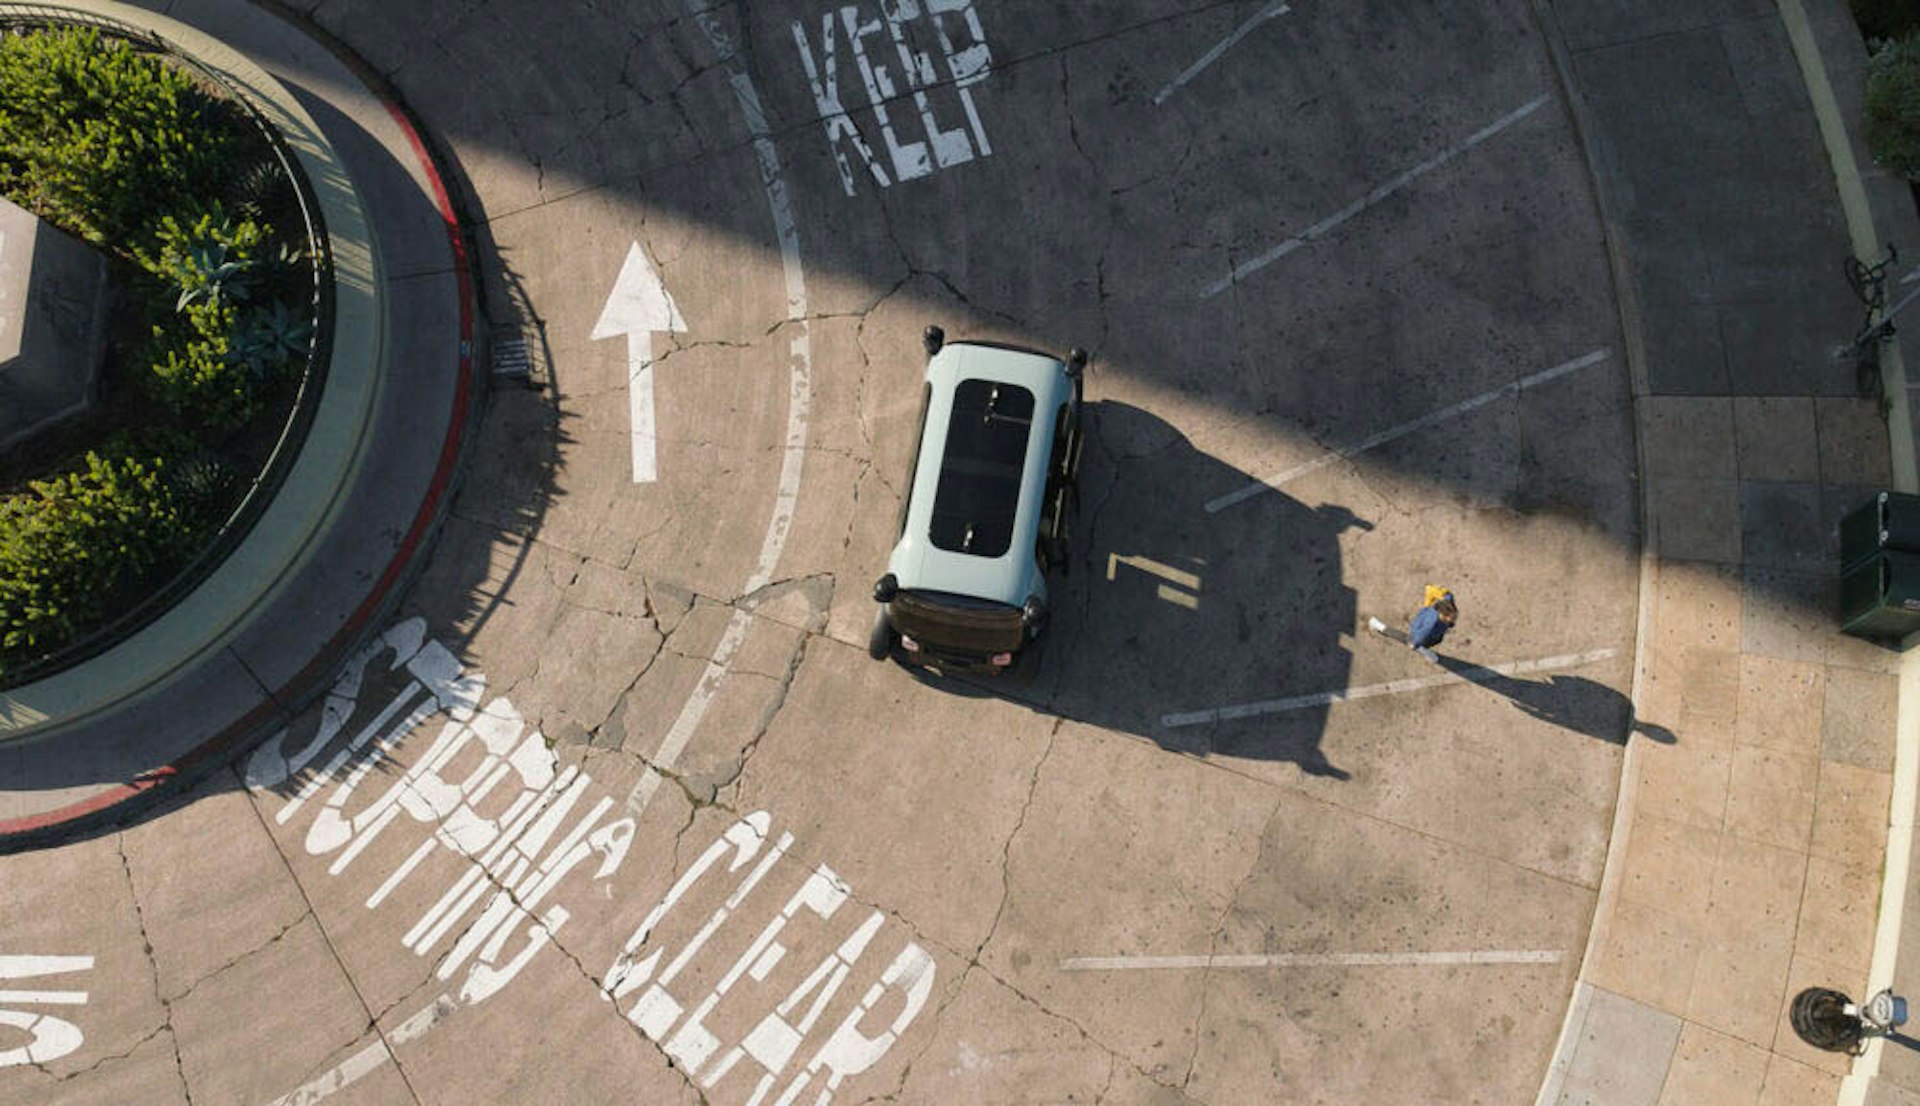 aerial view of zoox robotaxi in a parking lot with a person walking away